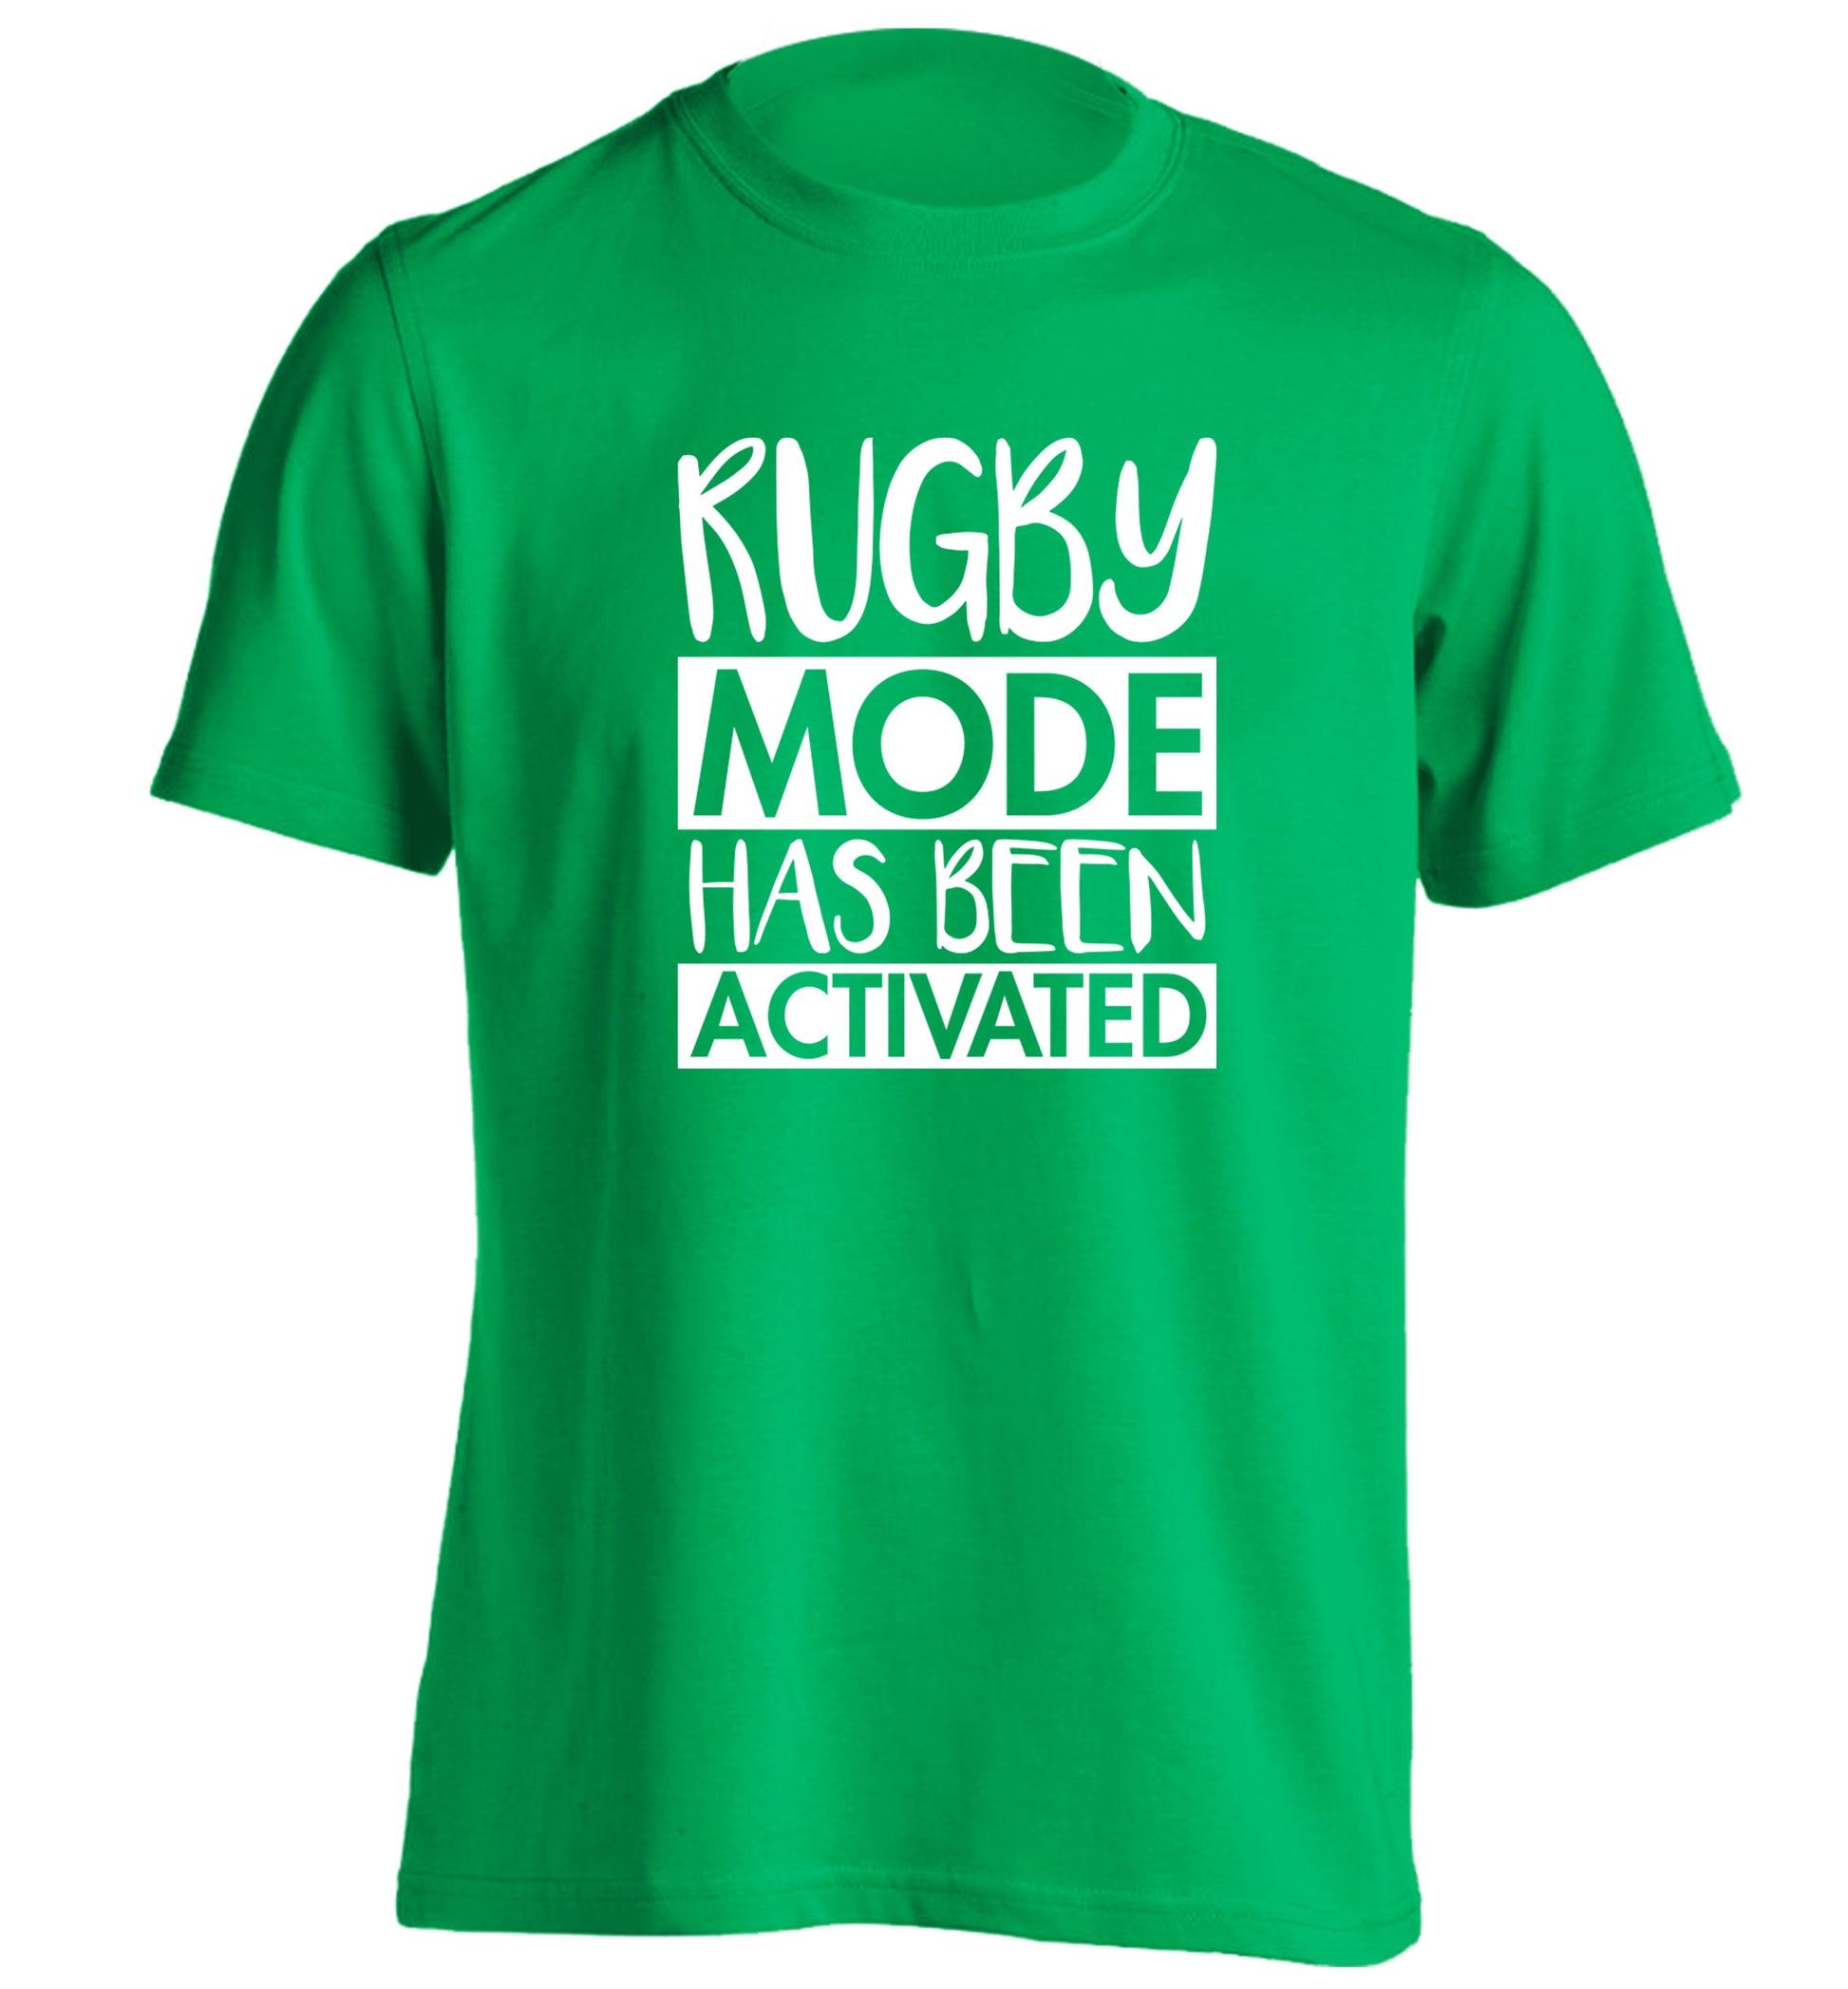 Rugby mode activated adults unisex green Tshirt 2XL